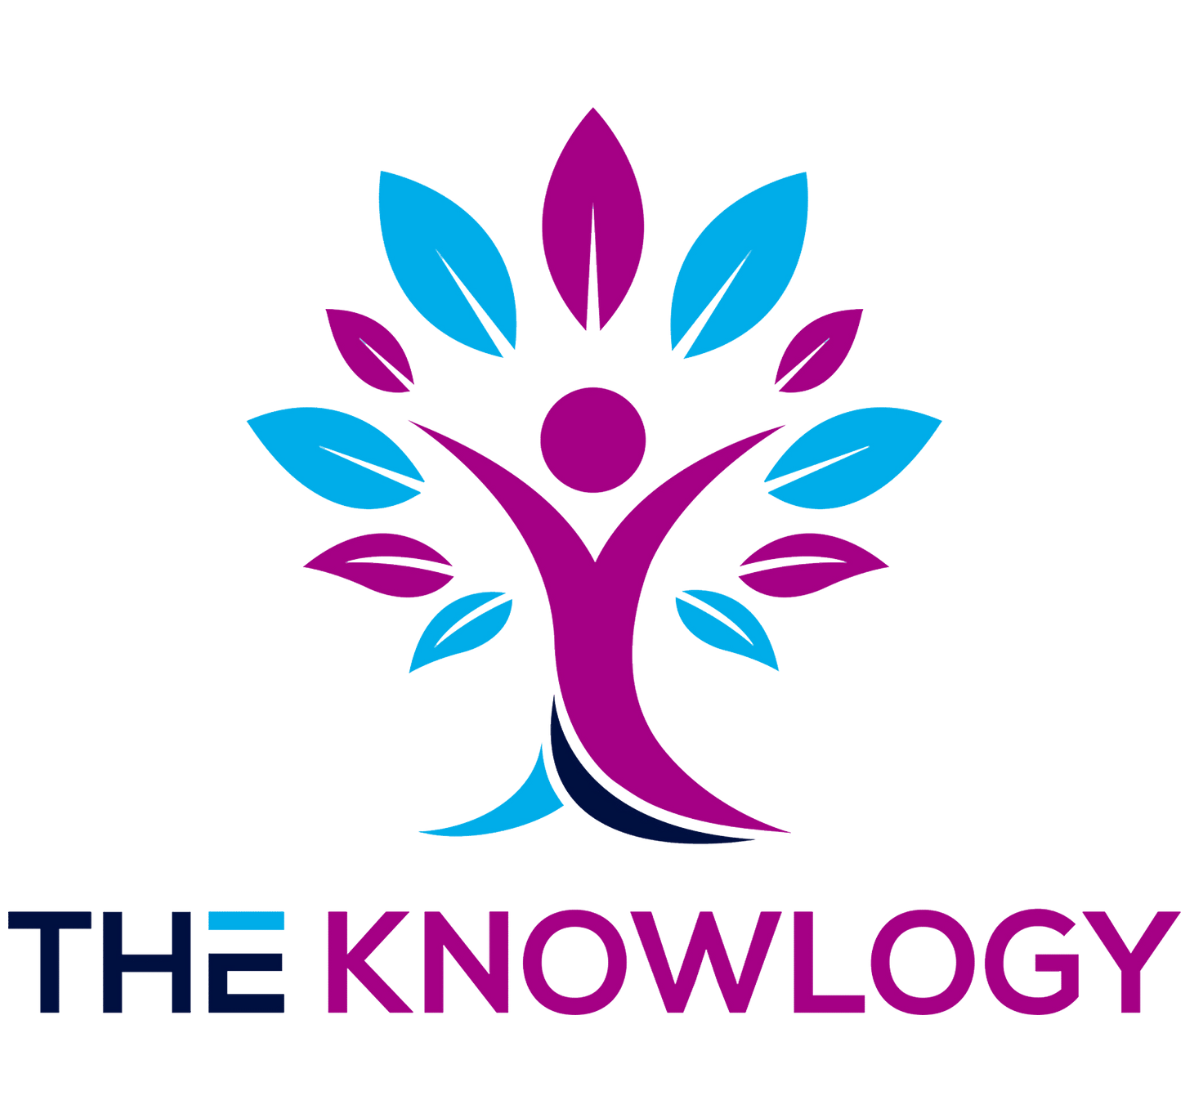 The Knowlogy